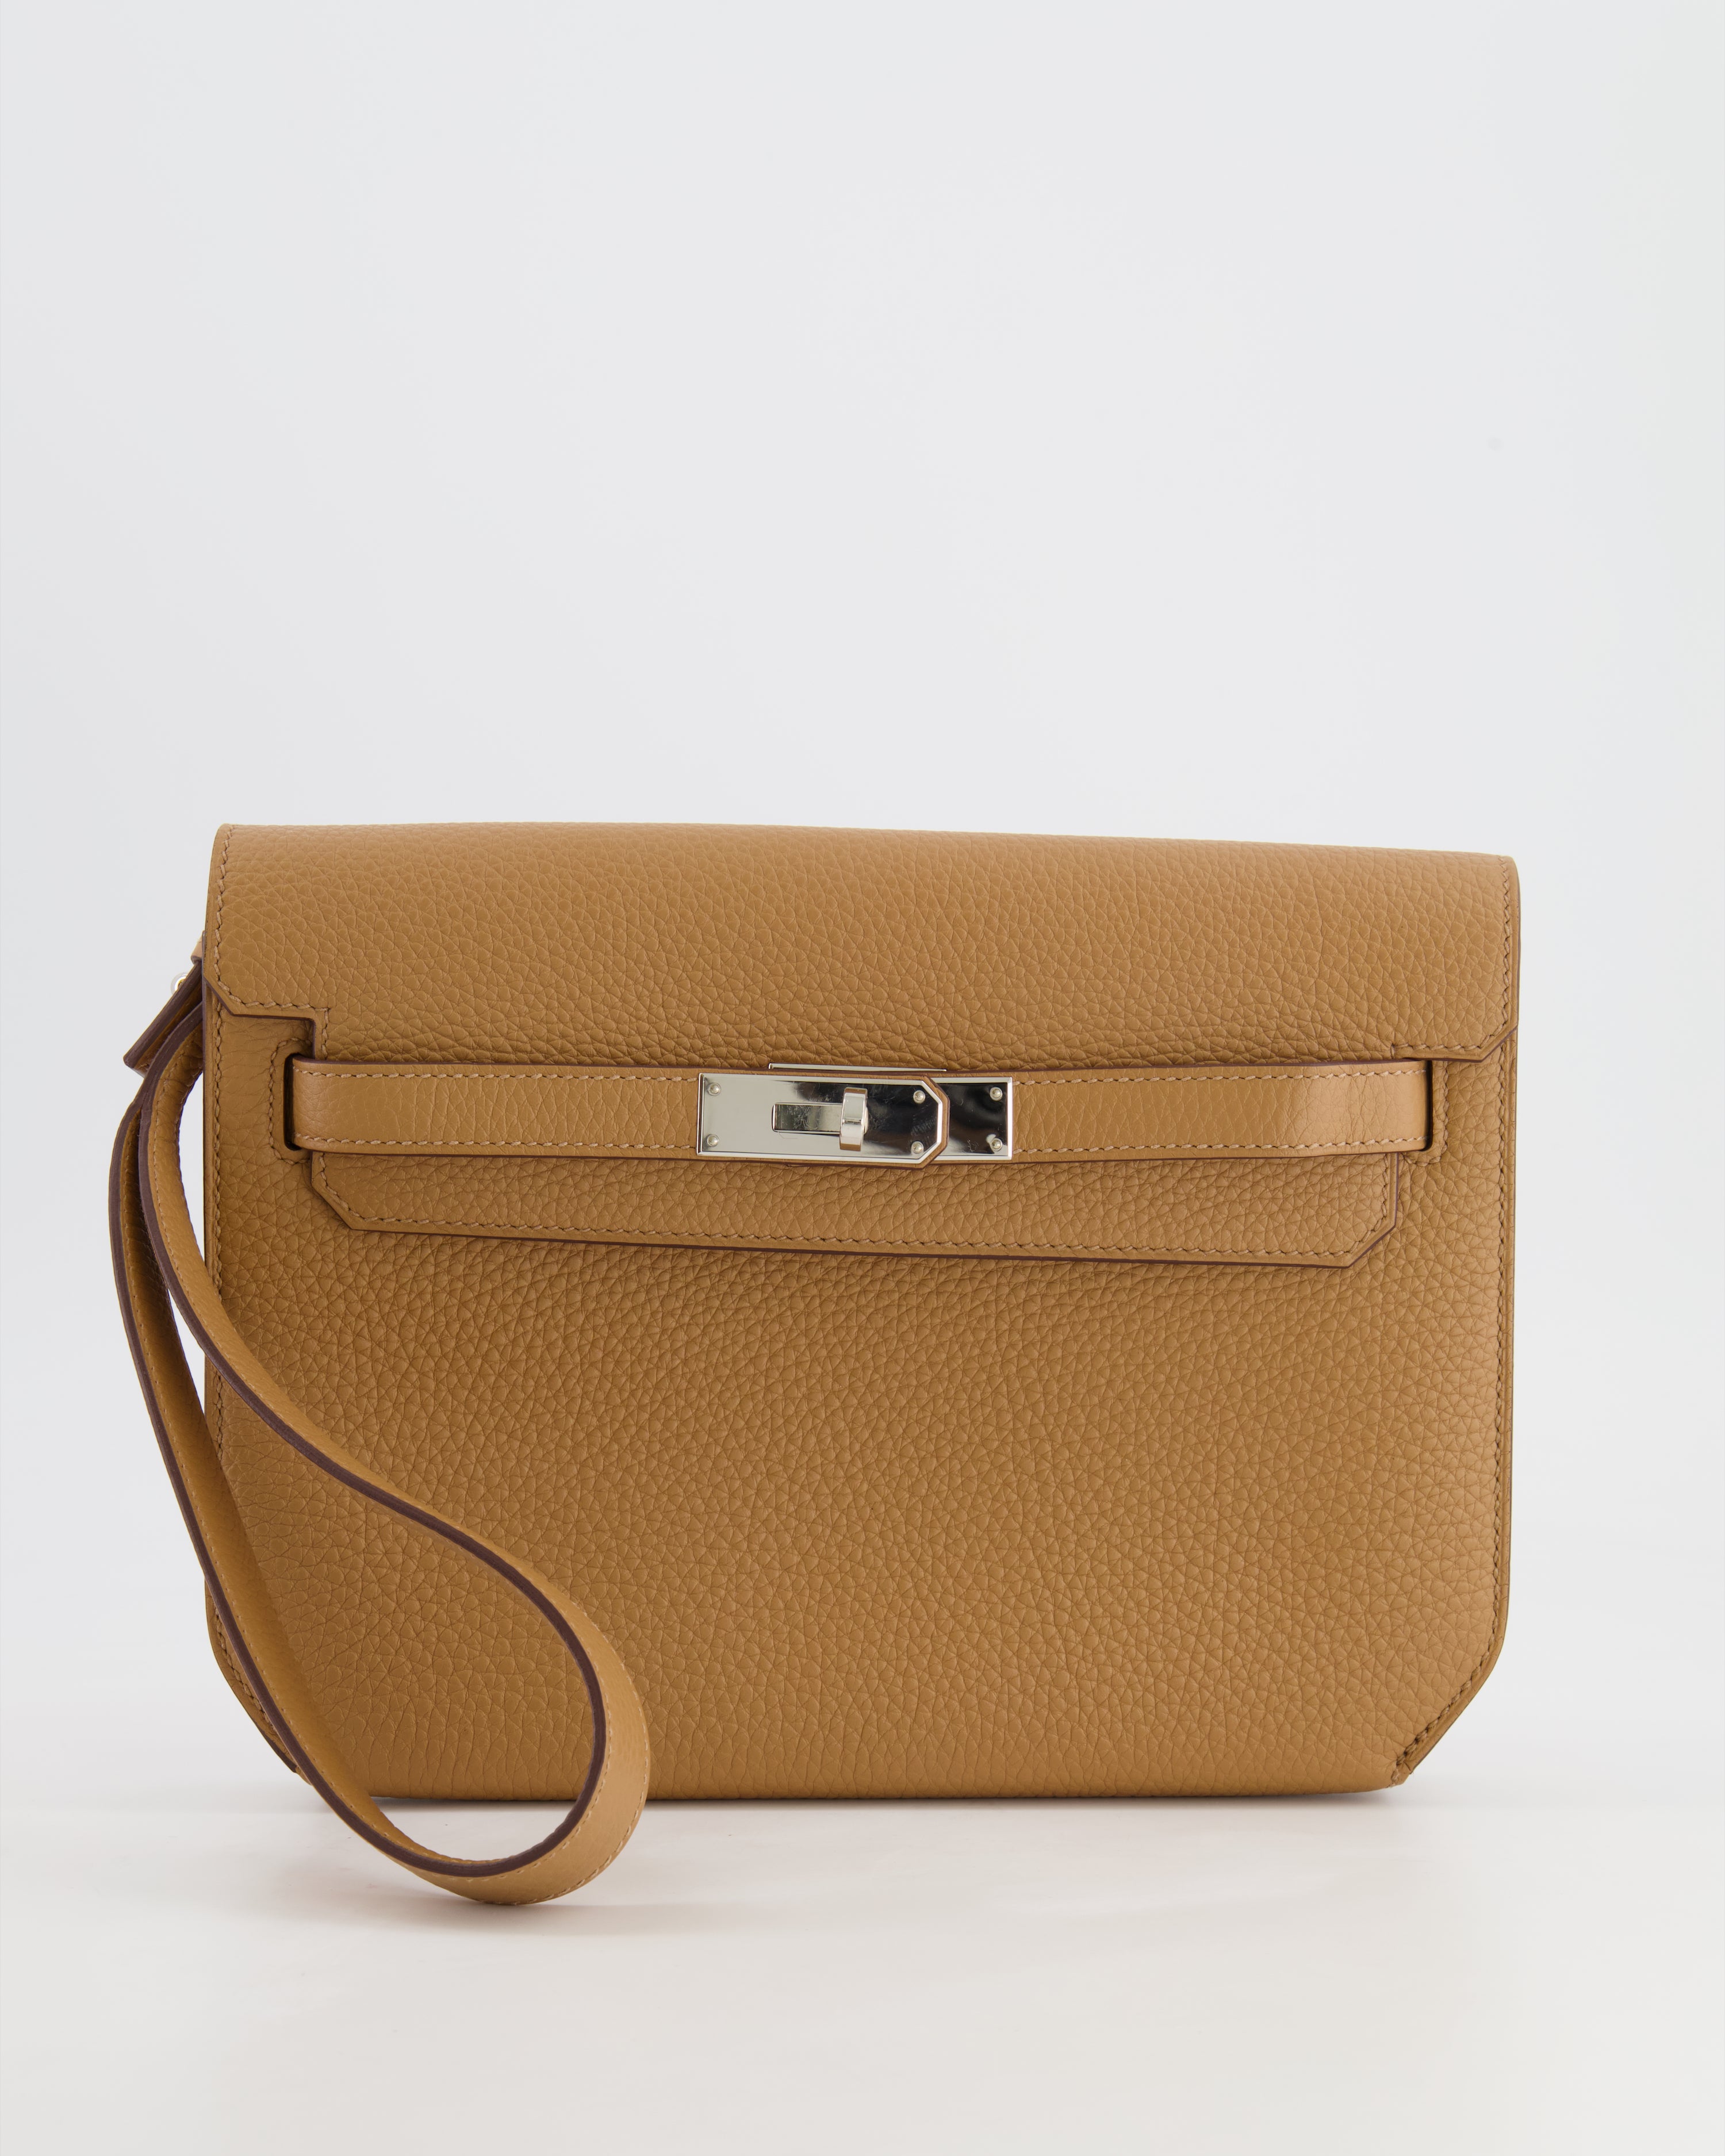 Leather Inspired Kelly Depeches Pouch Bag Gold Brown